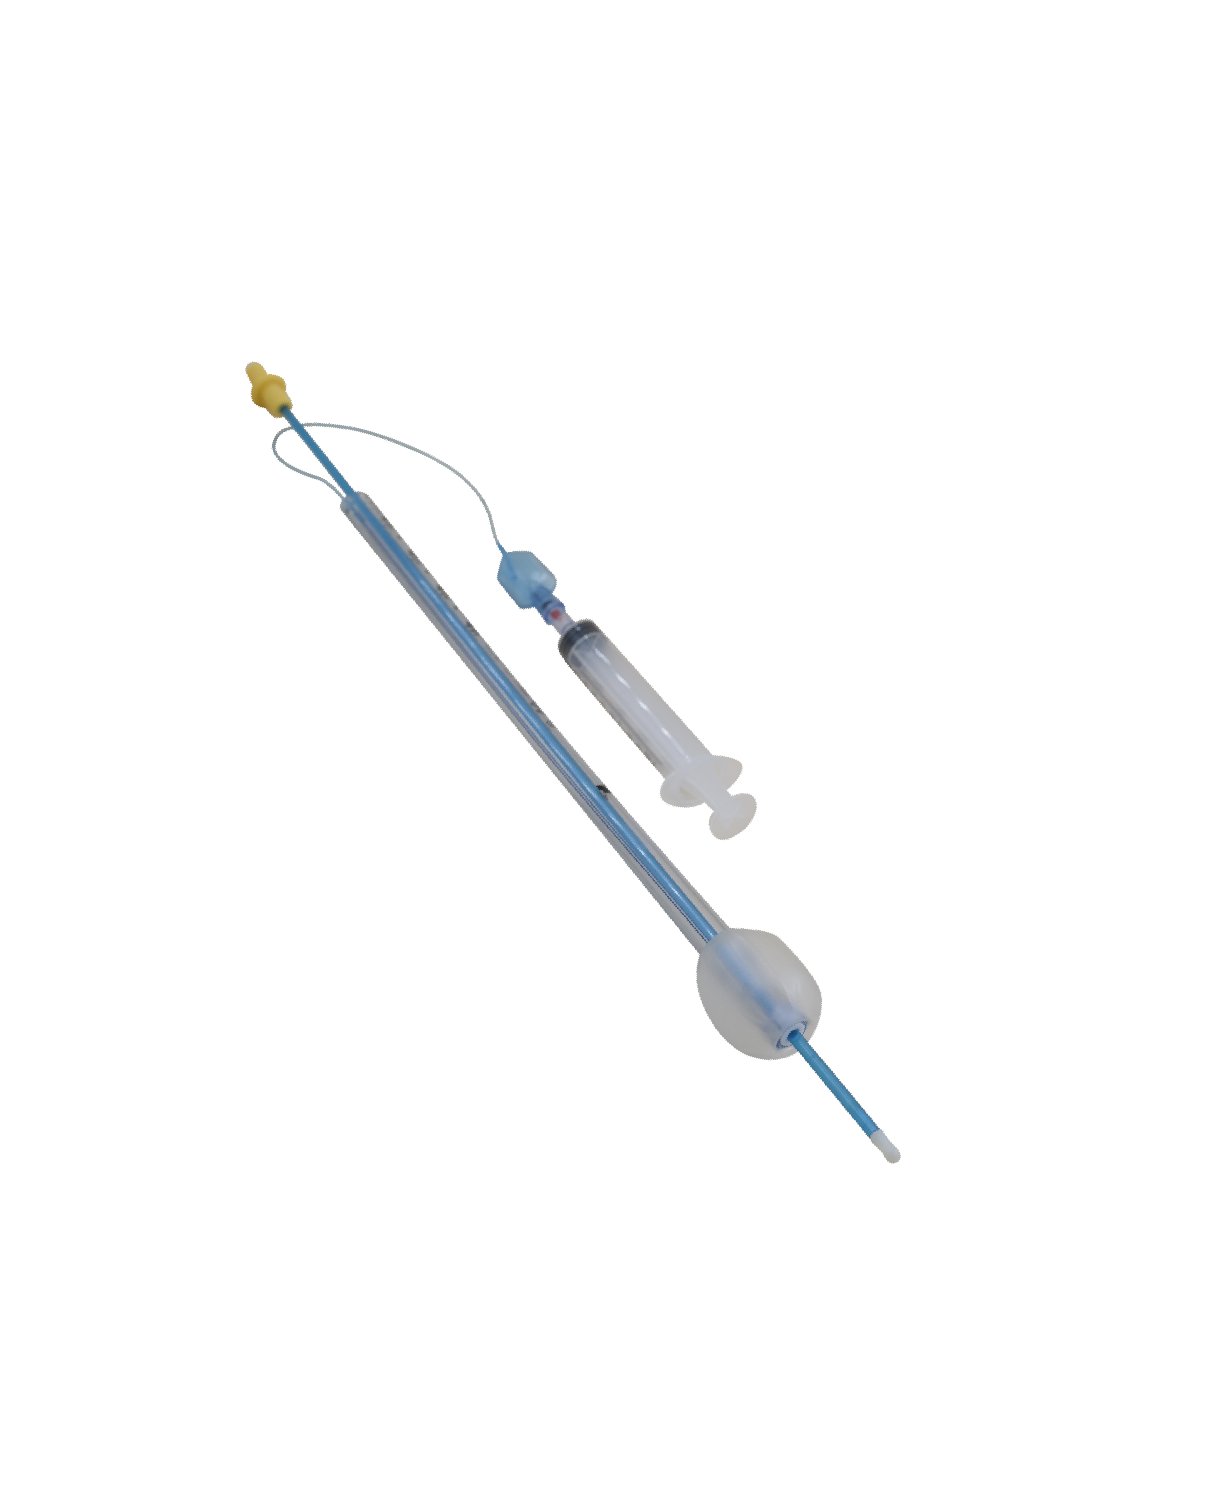 CANINE INFLATABLE ARTIFICIAL INSEMINATION CATHETERS